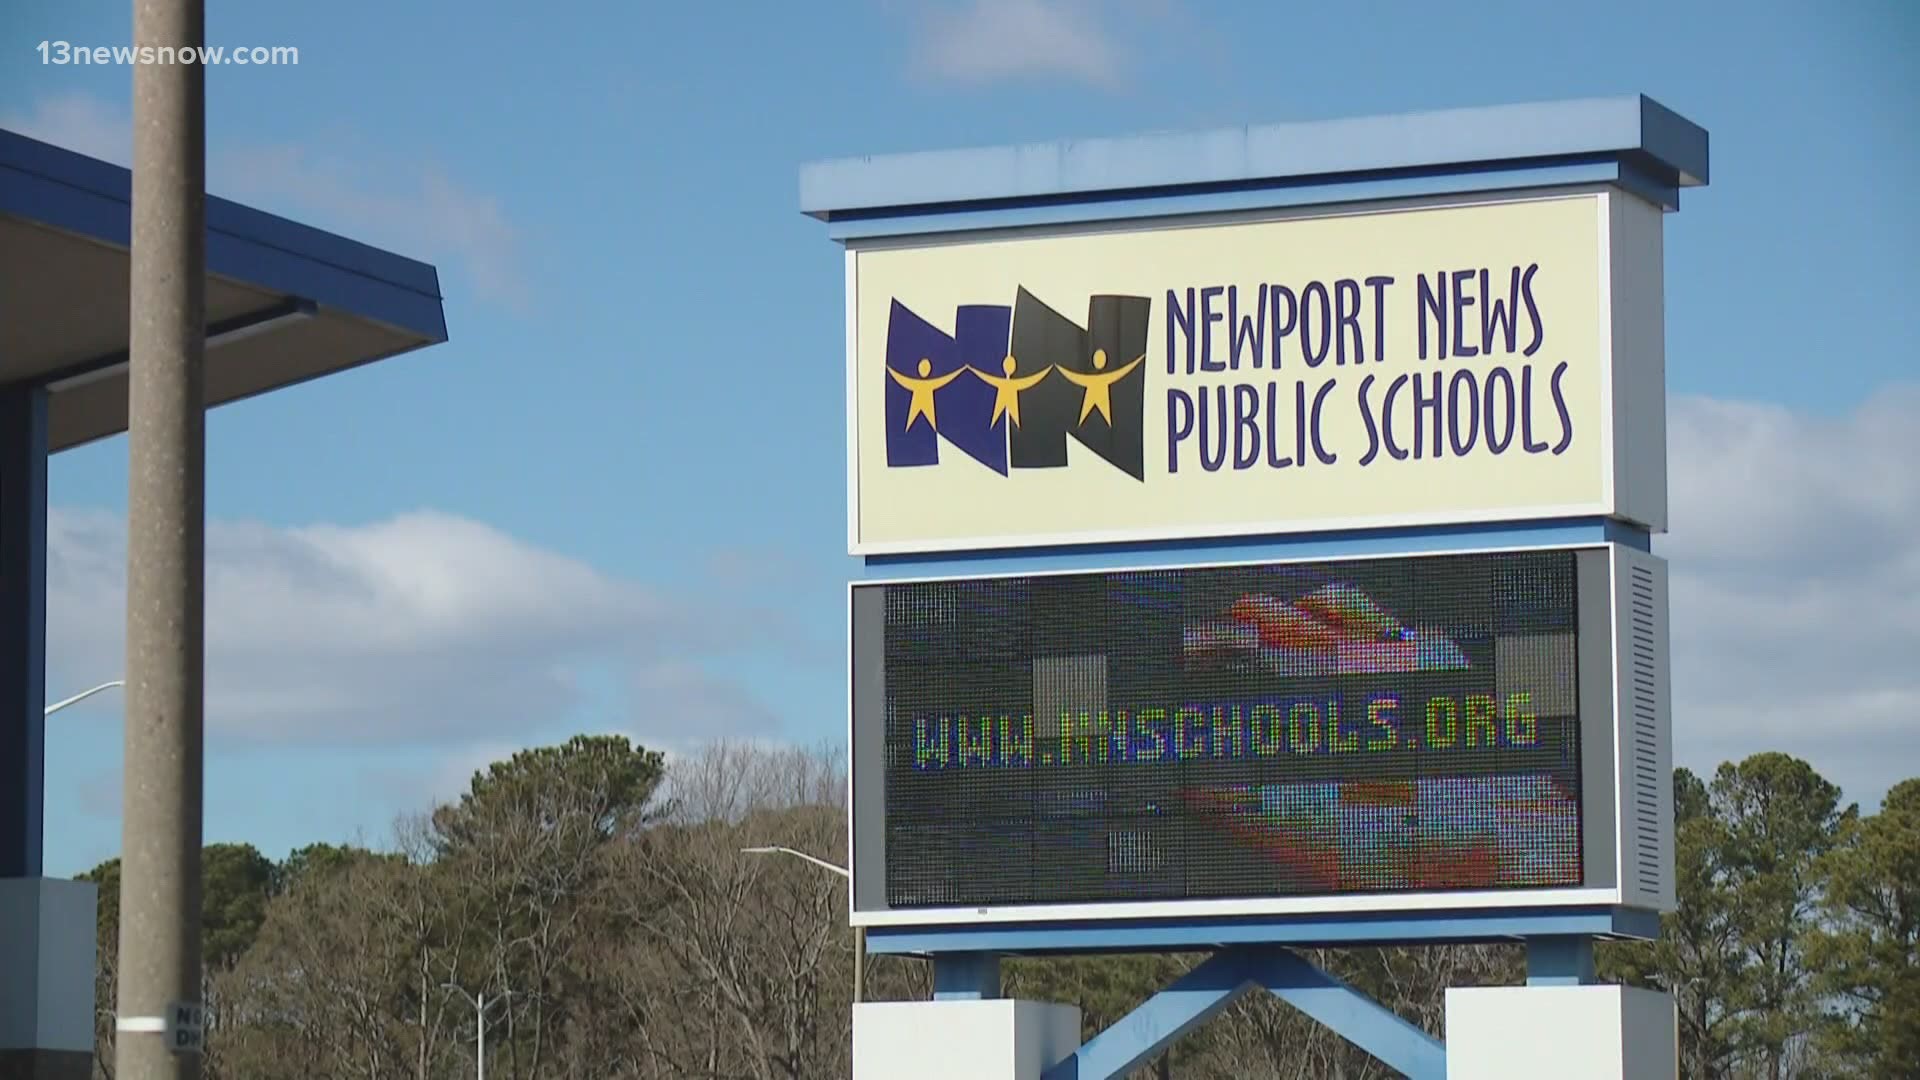 Newport News public school students to return to classroom within weeks